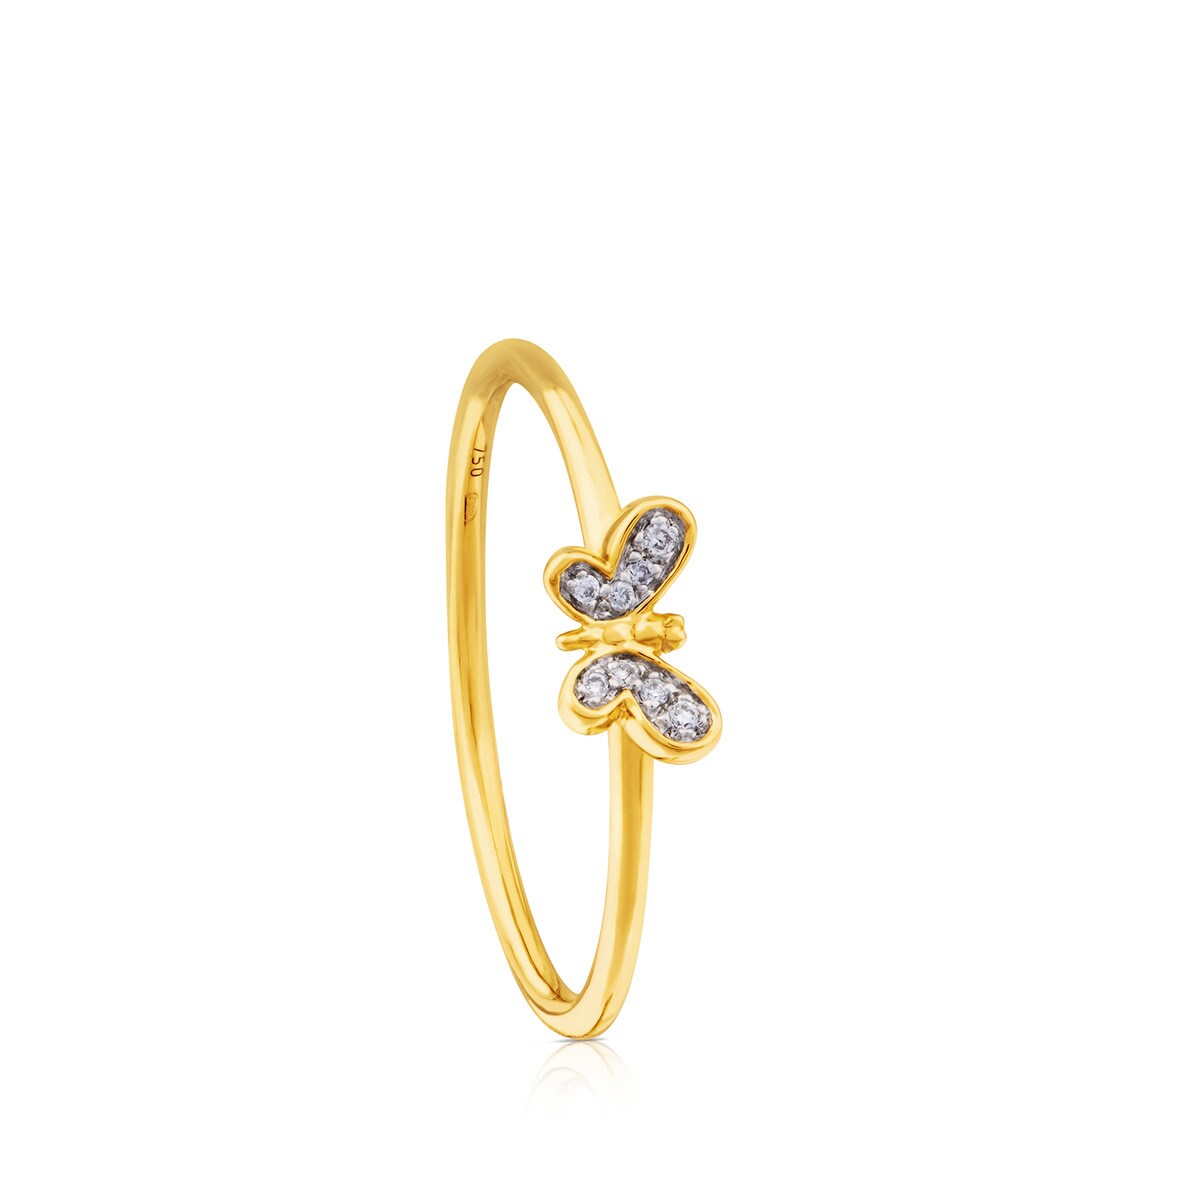 TOUS Bera Ring in Gold with Diamonds. Tous Site US